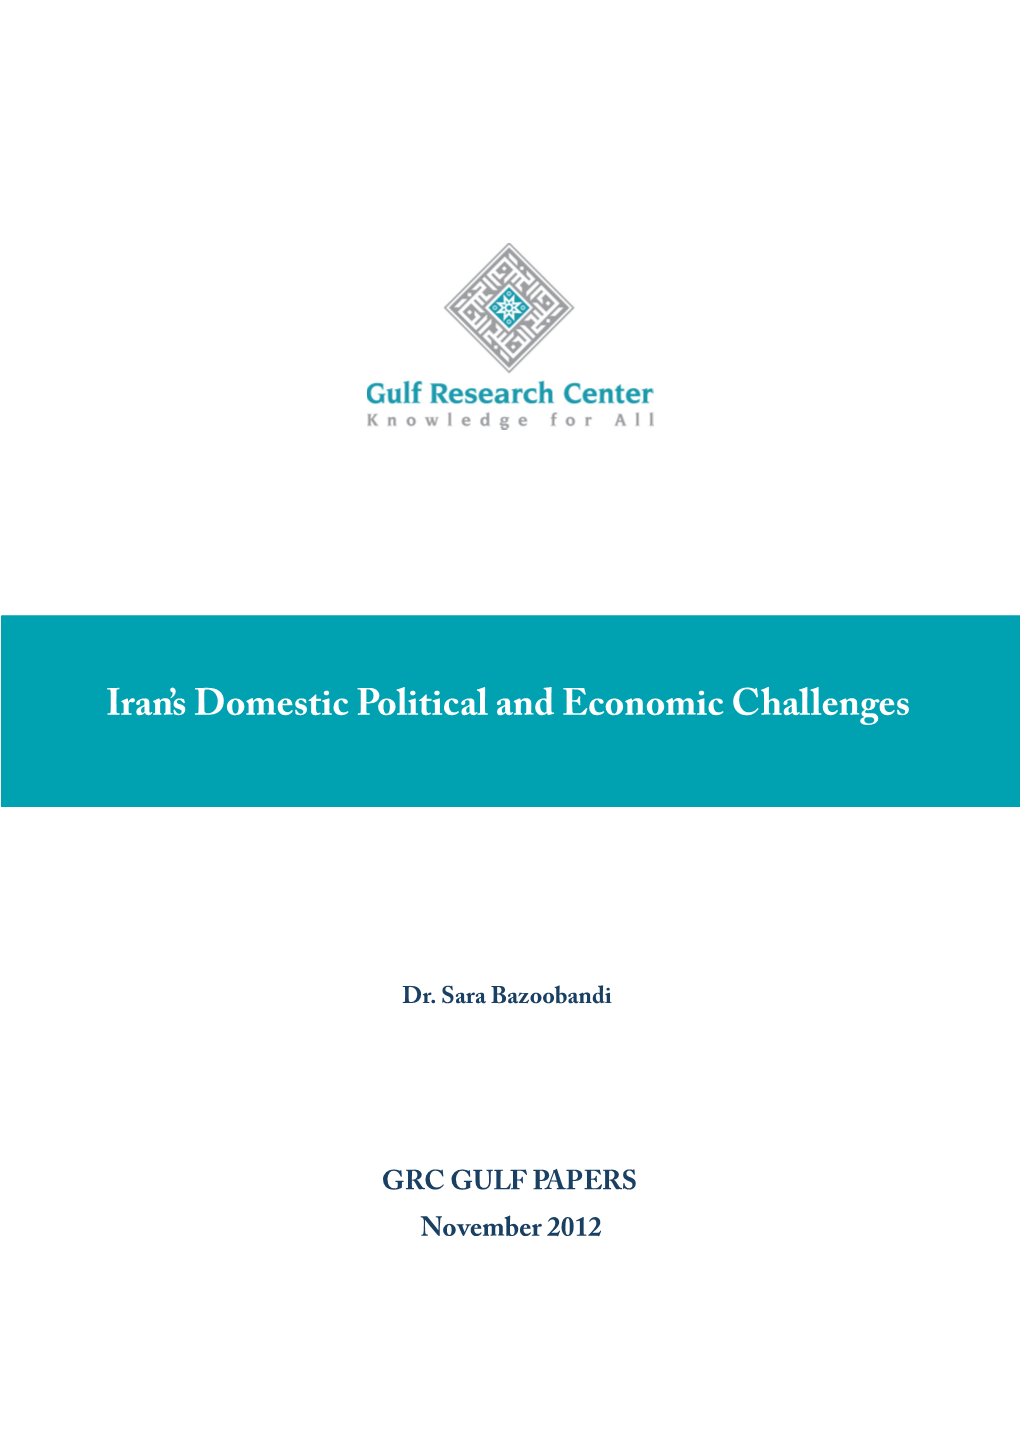 Iran's Domestic Political and Economic Challenges